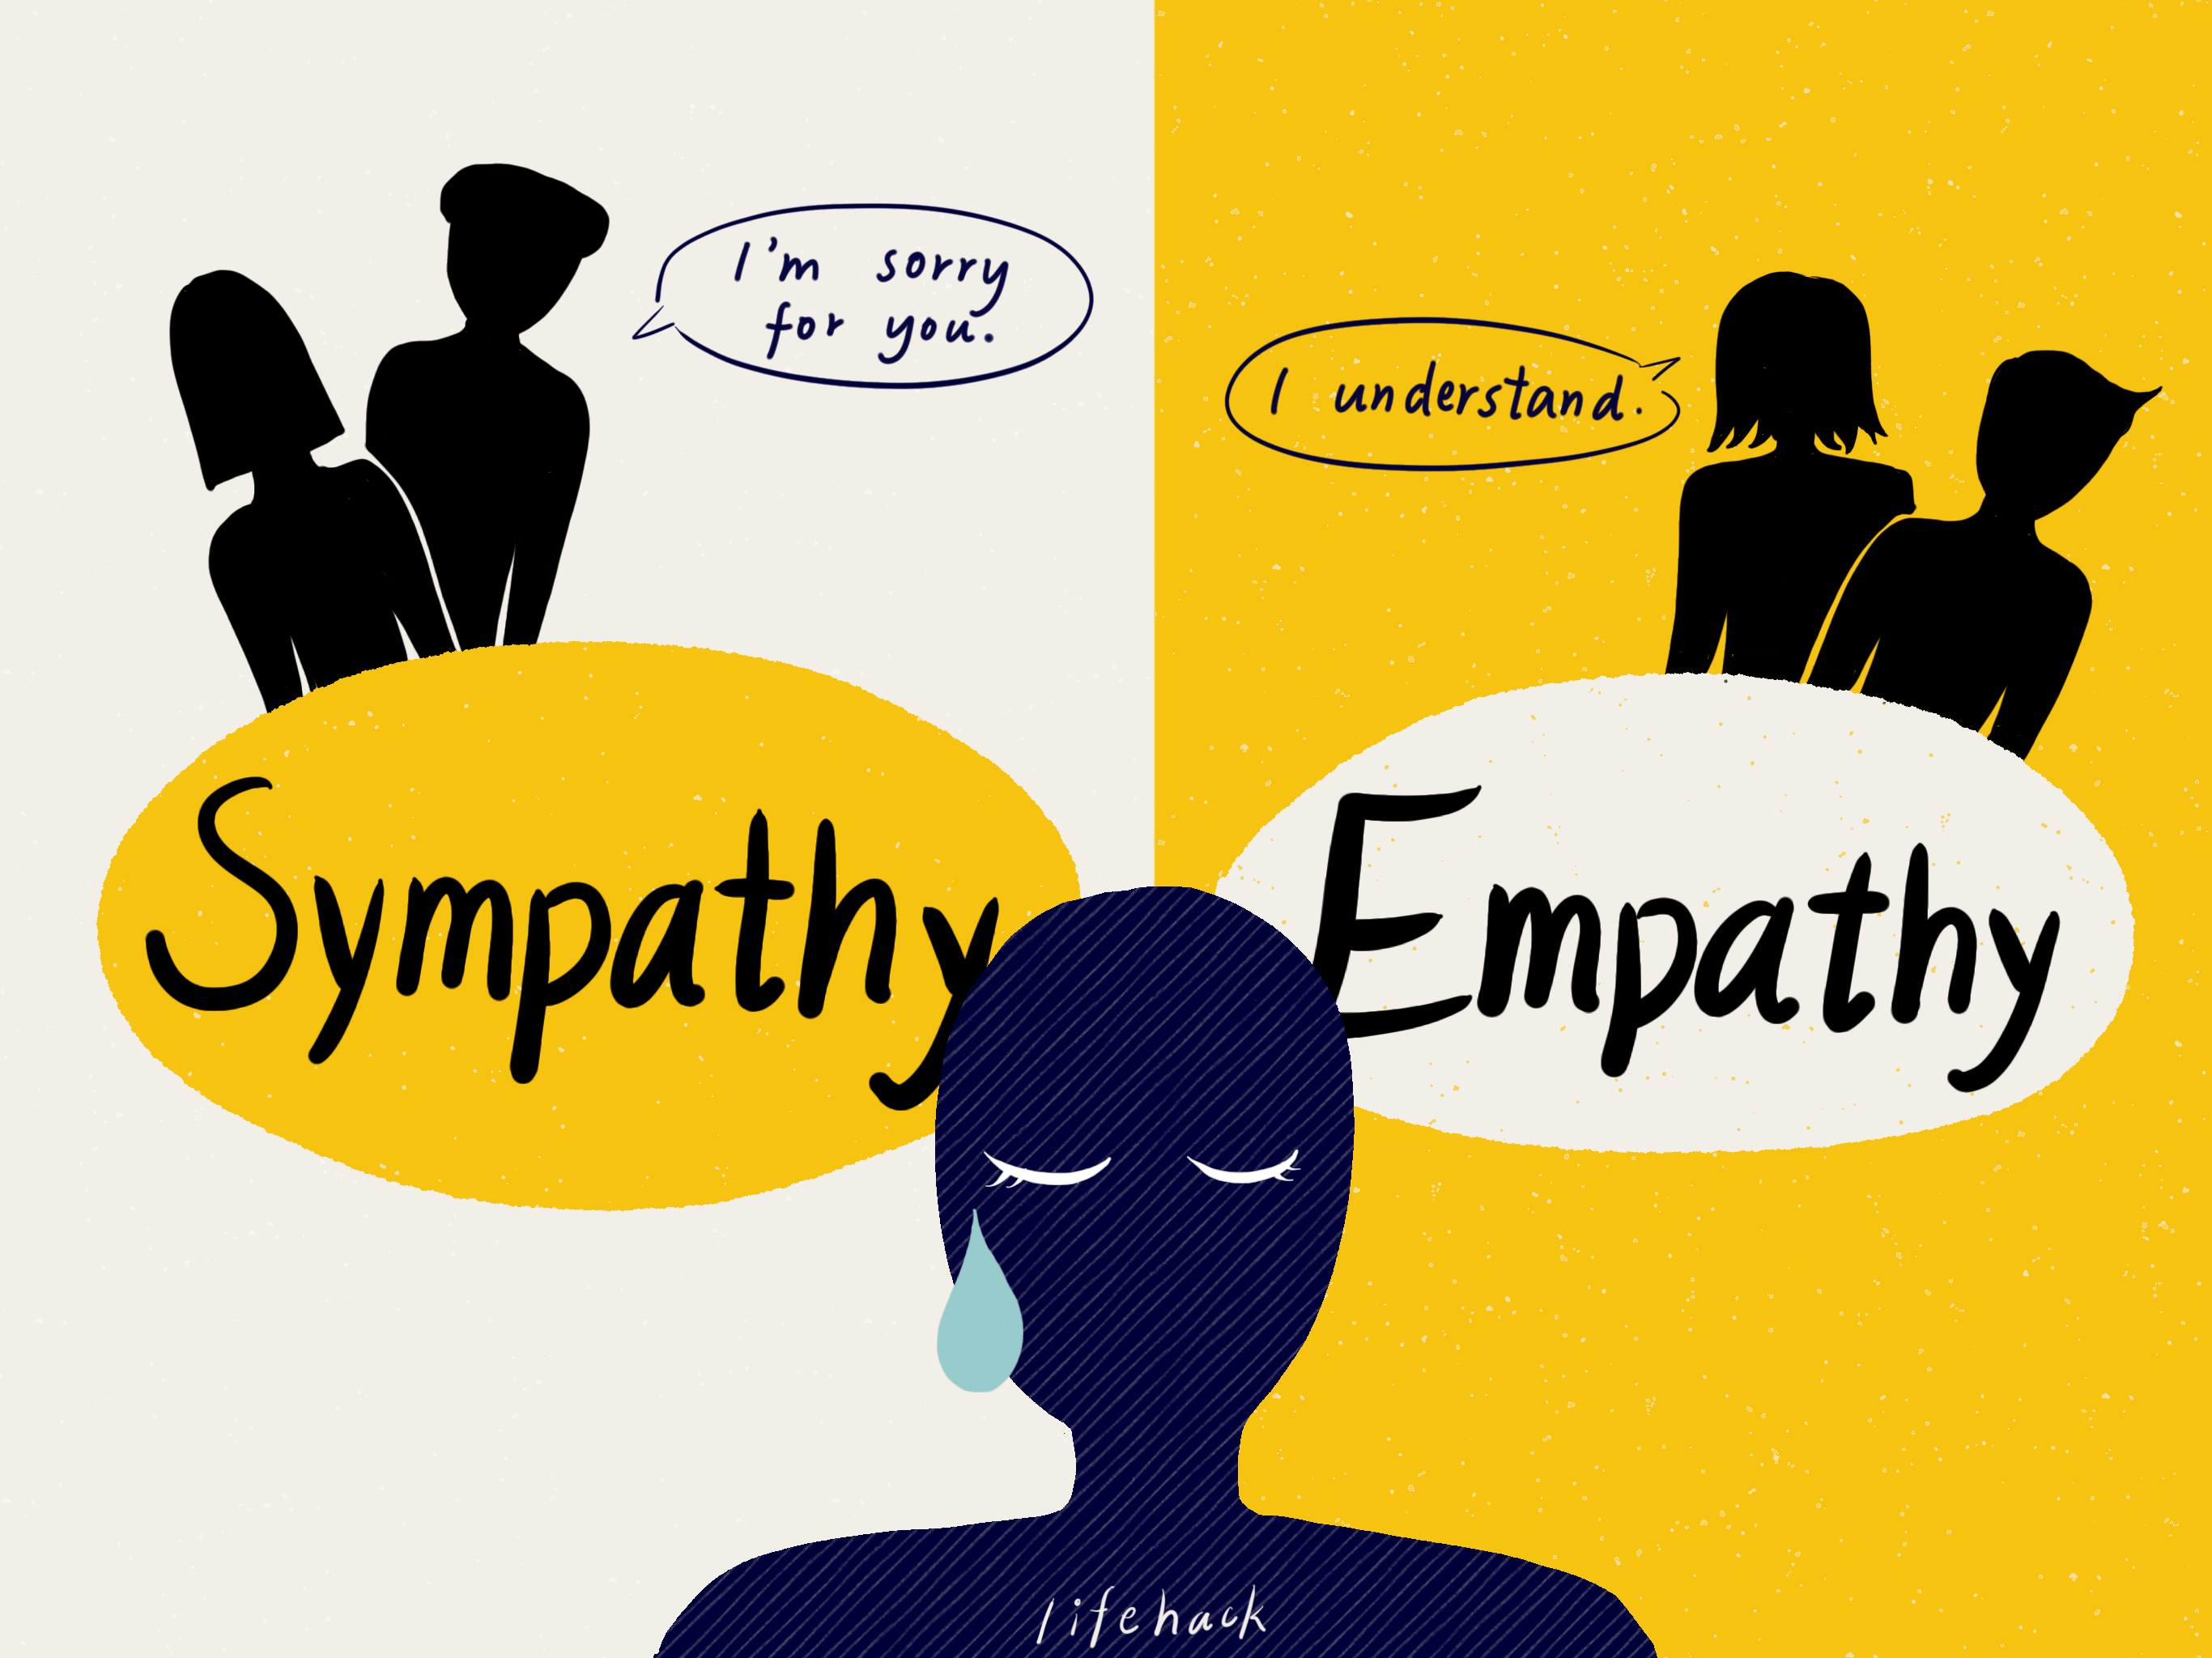 Empathy VS Sympathy: What Are The Key Differences?